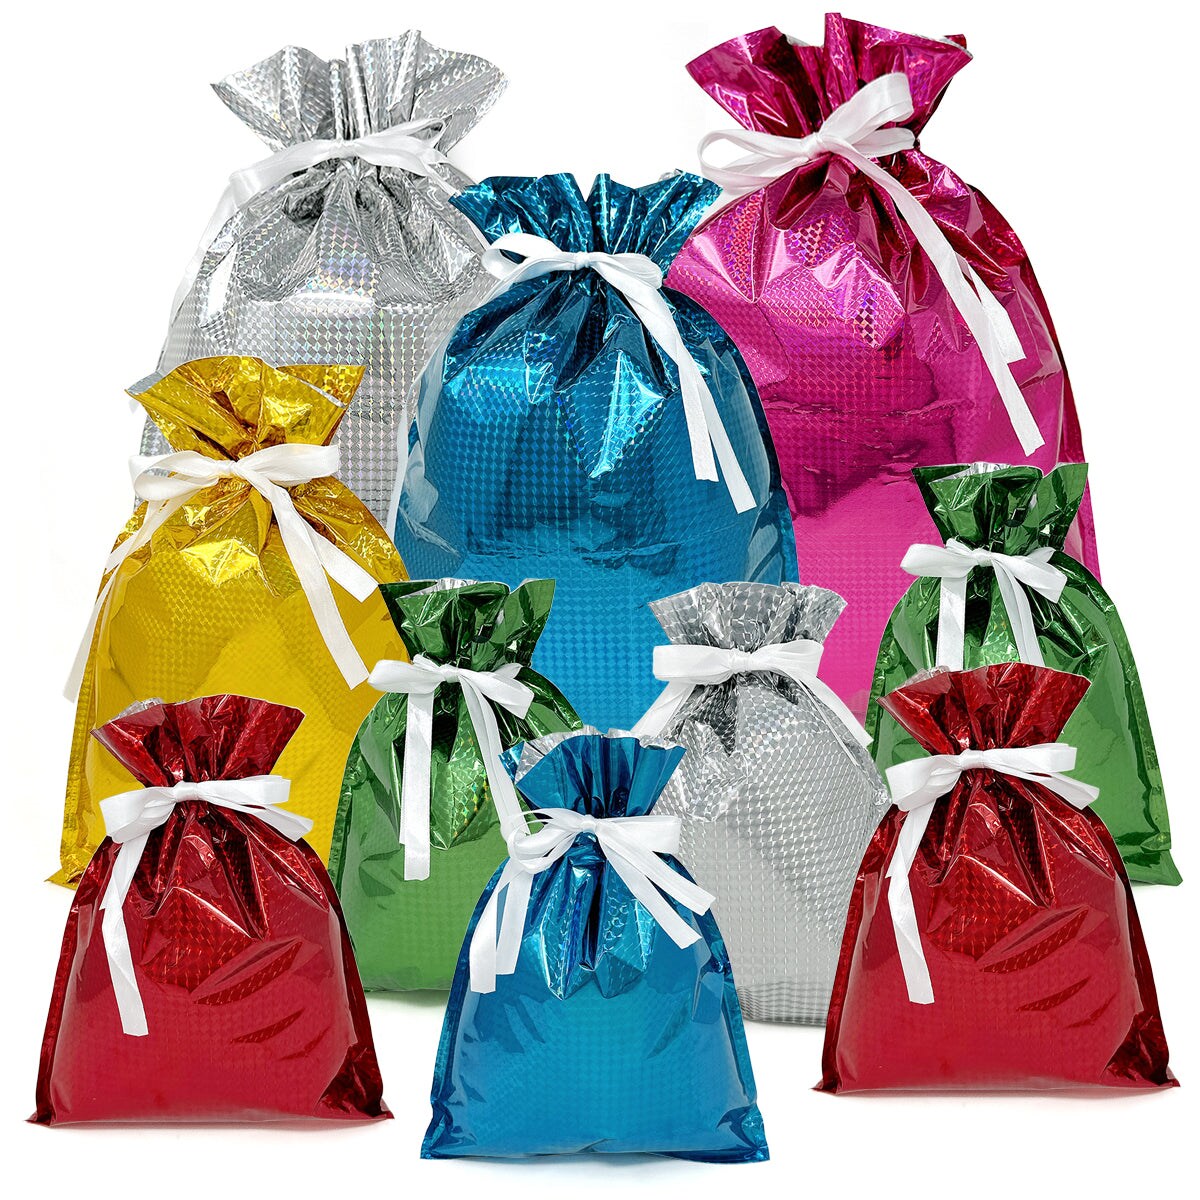 Sparkle and Bash 24 Pack Metallic Gold Gift Bags with Handles for Birthday Party Favors, Small Business Supplies, Easter, Baby Shower, 10 x 8 x 4.25